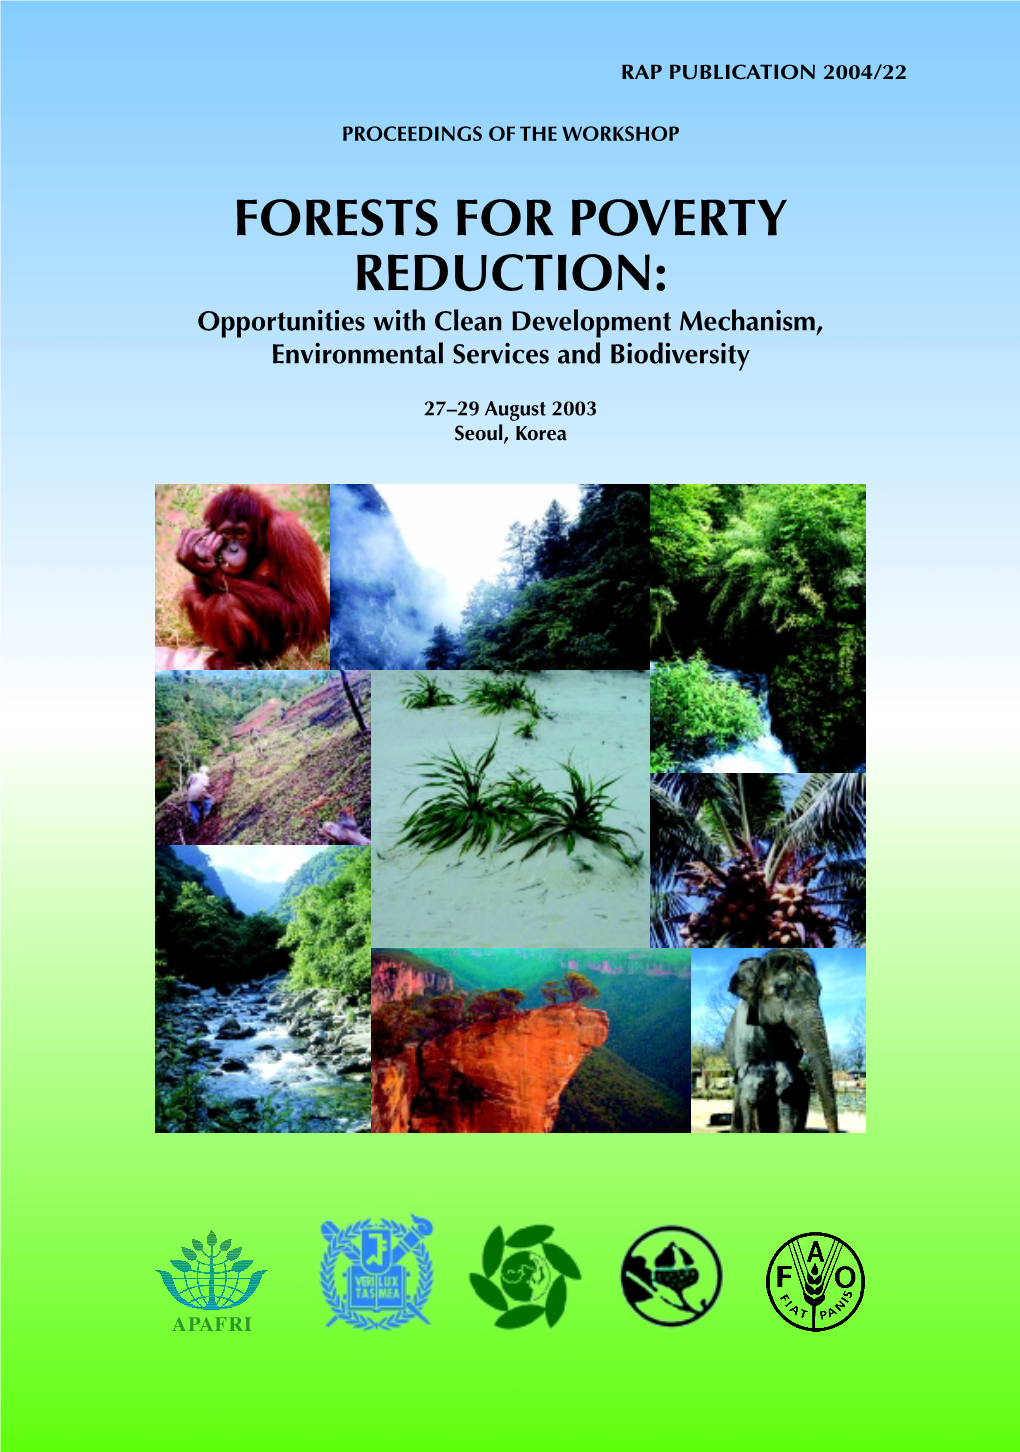 FORESTS for POVERTY REDUCTION: Opportunities with Clean Development Mechanism, Environmental Services and Biodiversity